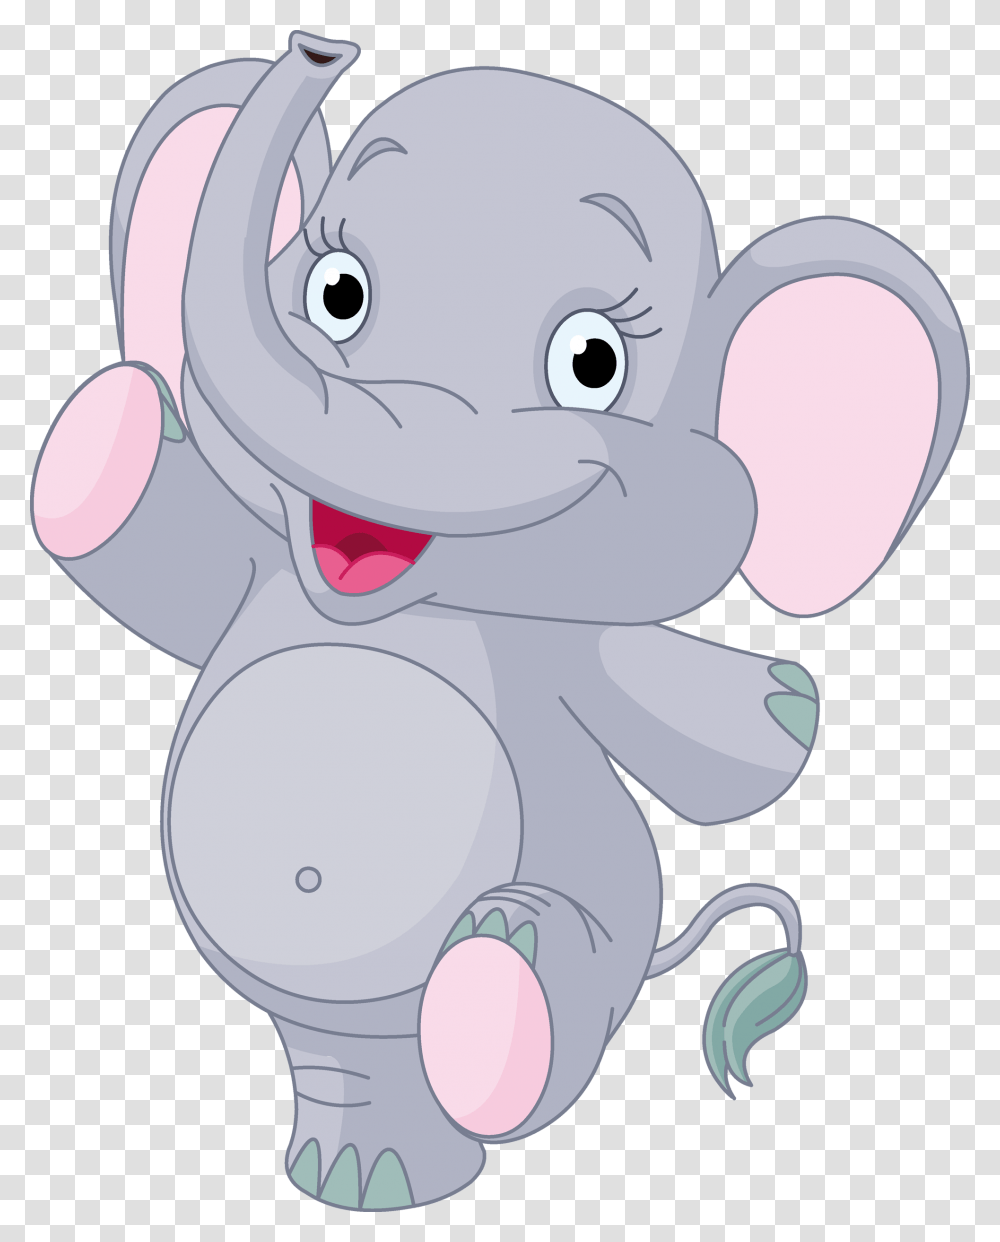 Baby Elephant Elephant Images Hd Photo Clipart Cute Cartoon Baby Elephant, Drawing, Animal, Mammal Transparent Png